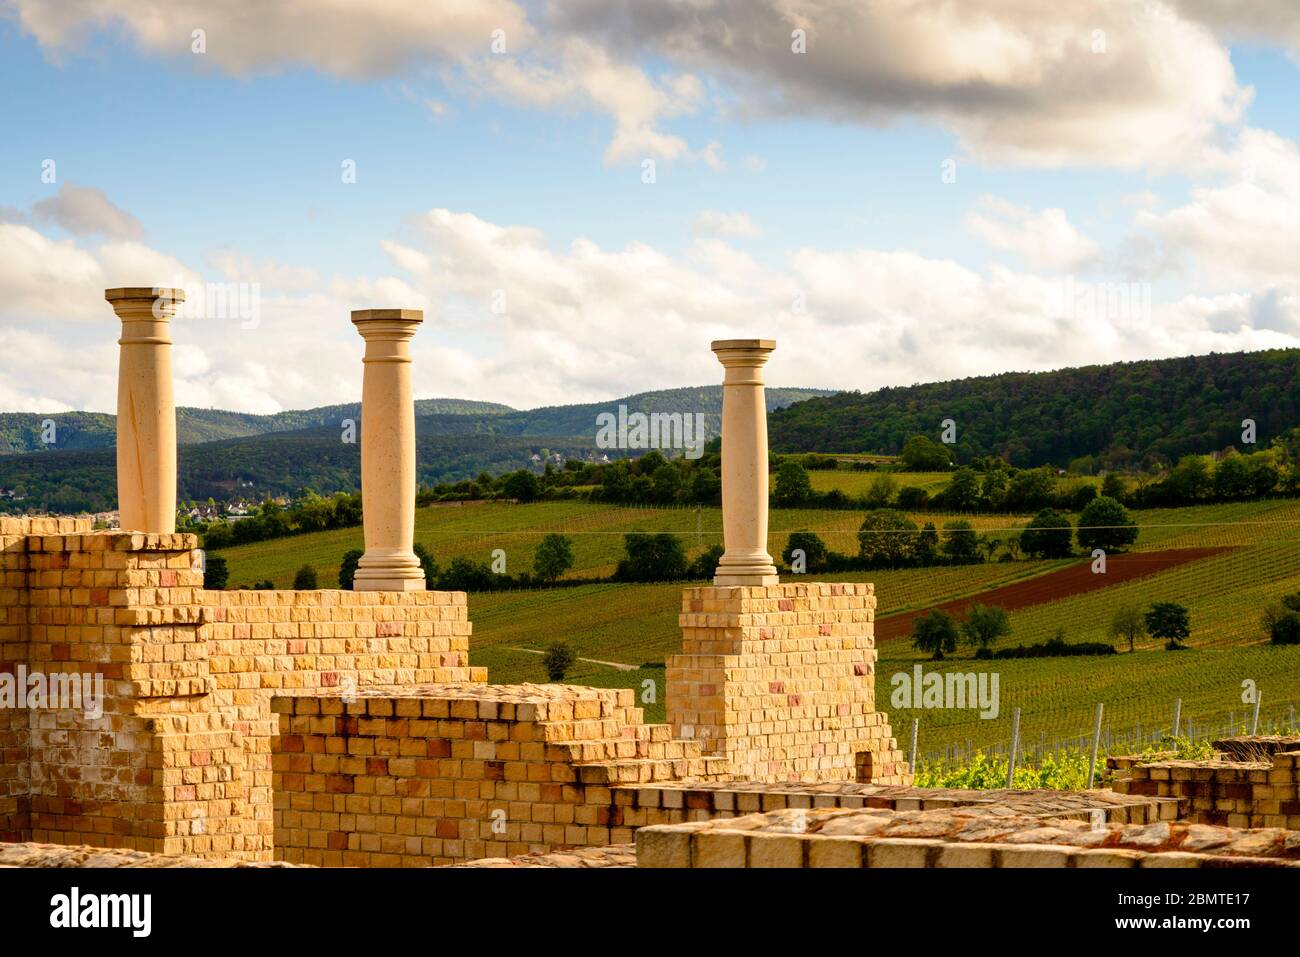 Ancient Roman villa overlooking the vineyards in Ungstein, Germany Stock Photo